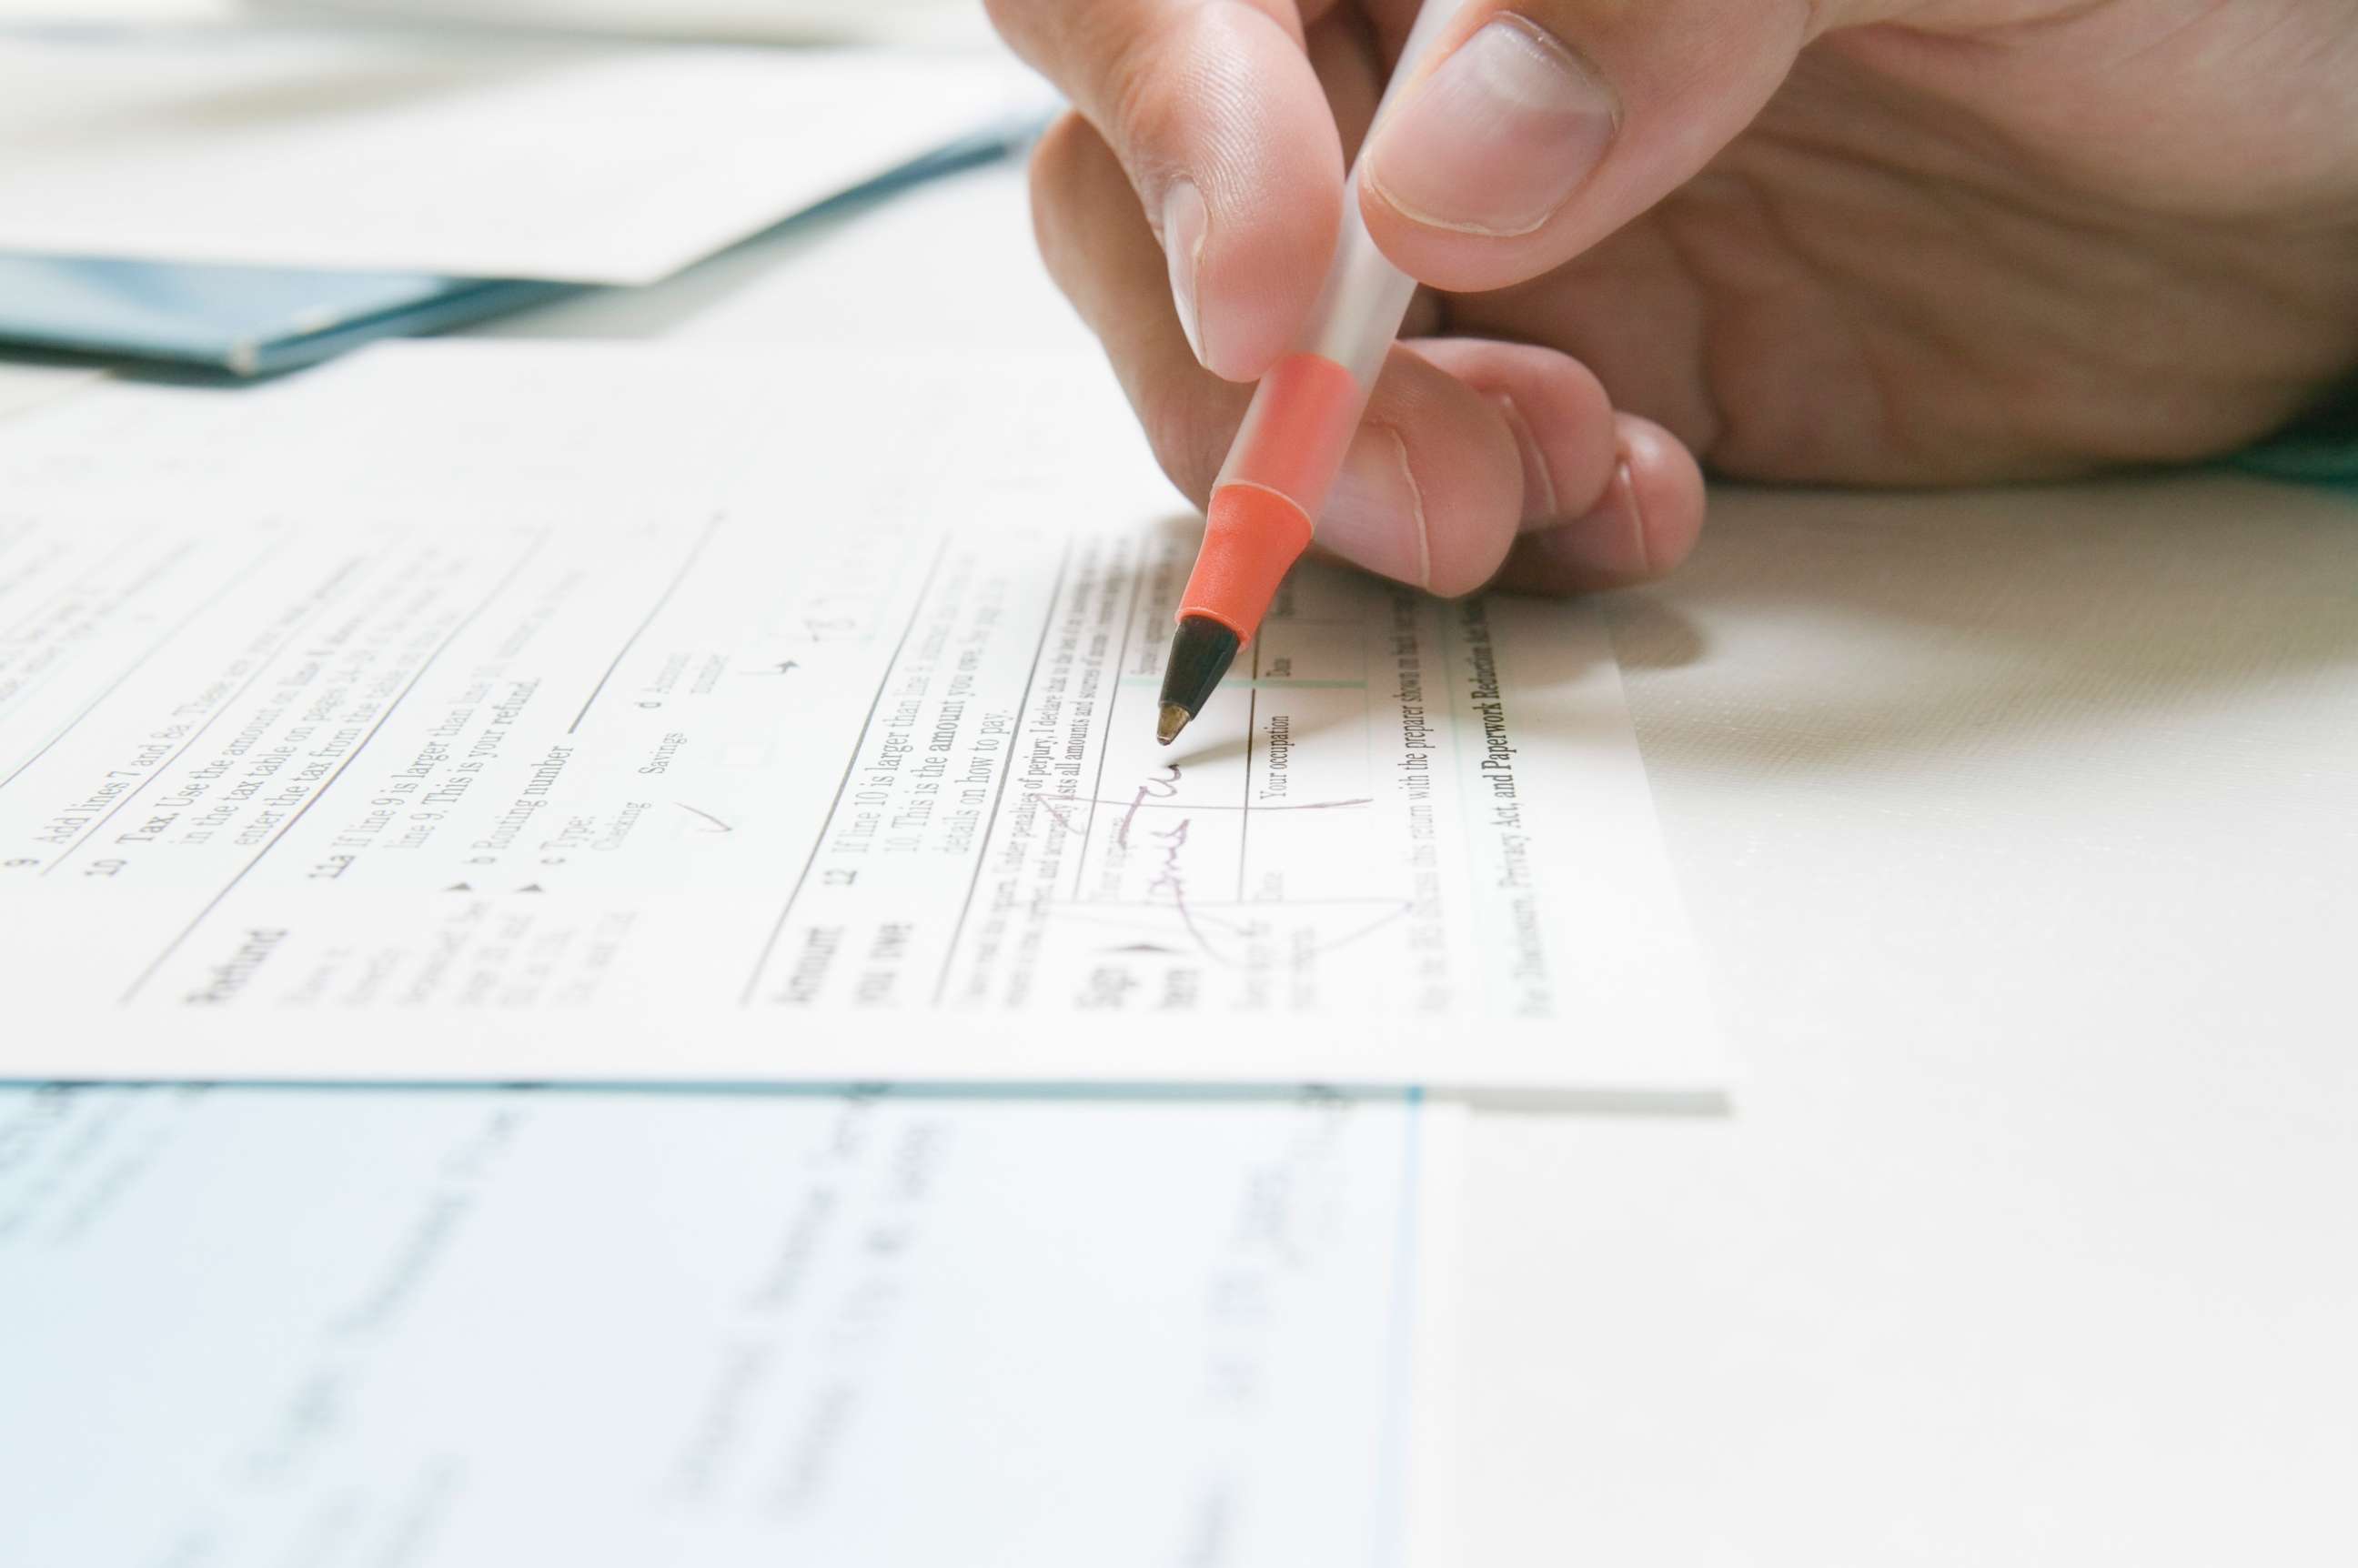 PHOTO: In this undated stock photo, a man signs an IRS tax form.